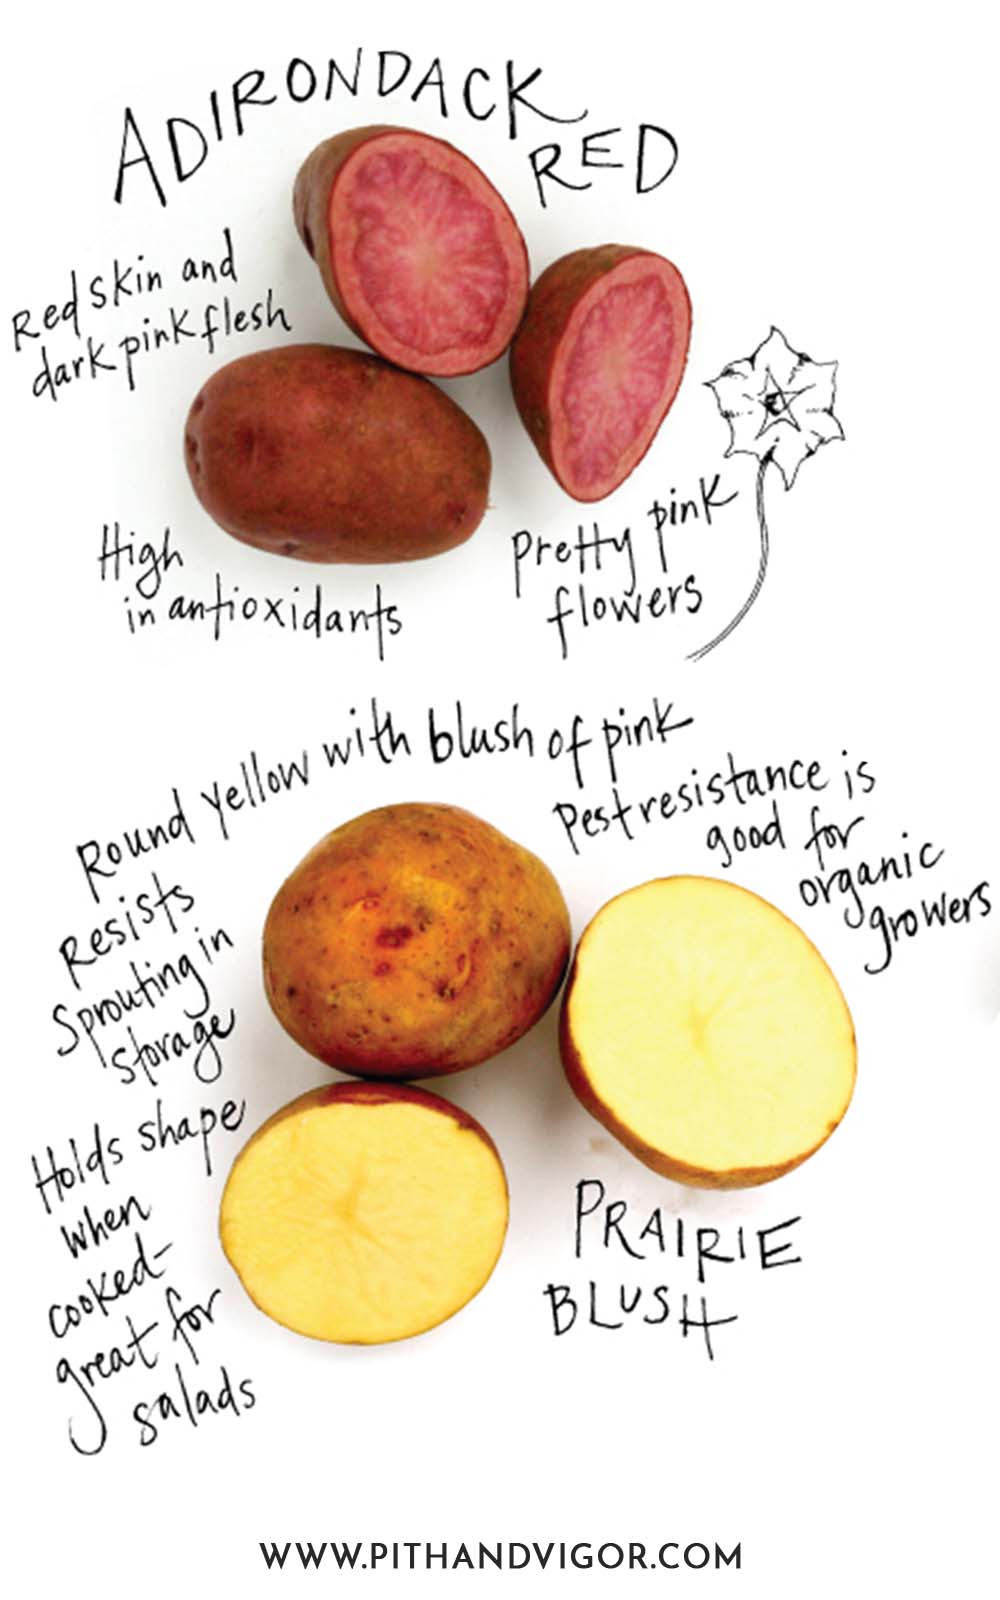 There are many more types of potatoes that can be grown nationwide - but these are some of the varieties that can be grown in the Northern USA (and Canada). 
 illustration of adirondack red potato and prairie blush potato 